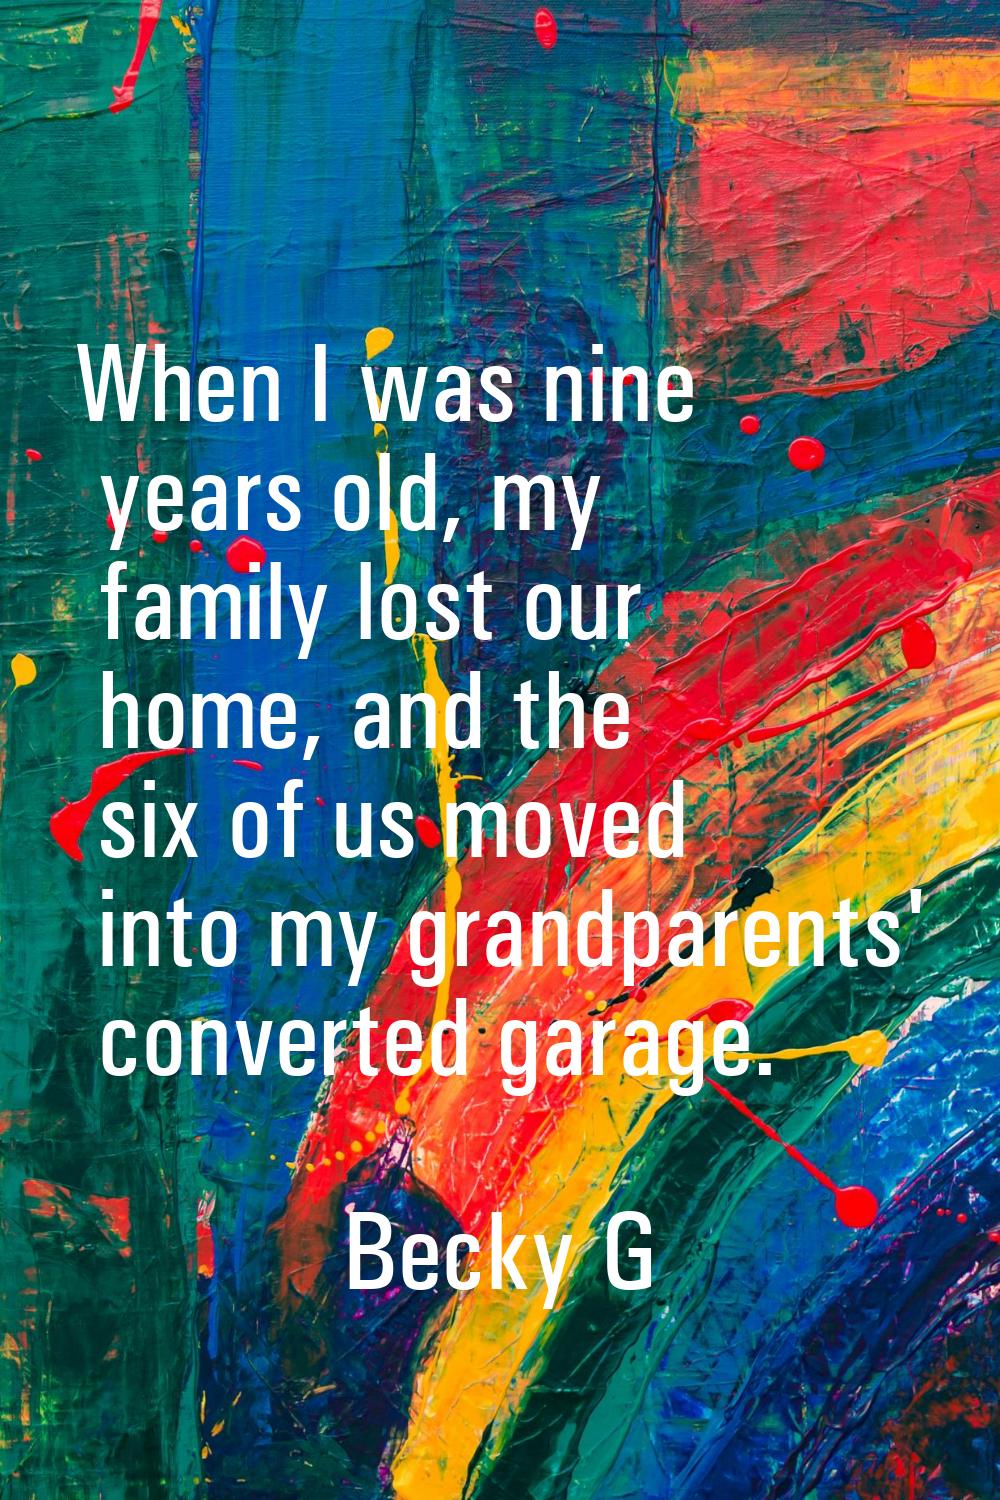 When I was nine years old, my family lost our home, and the six of us moved into my grandparents' c